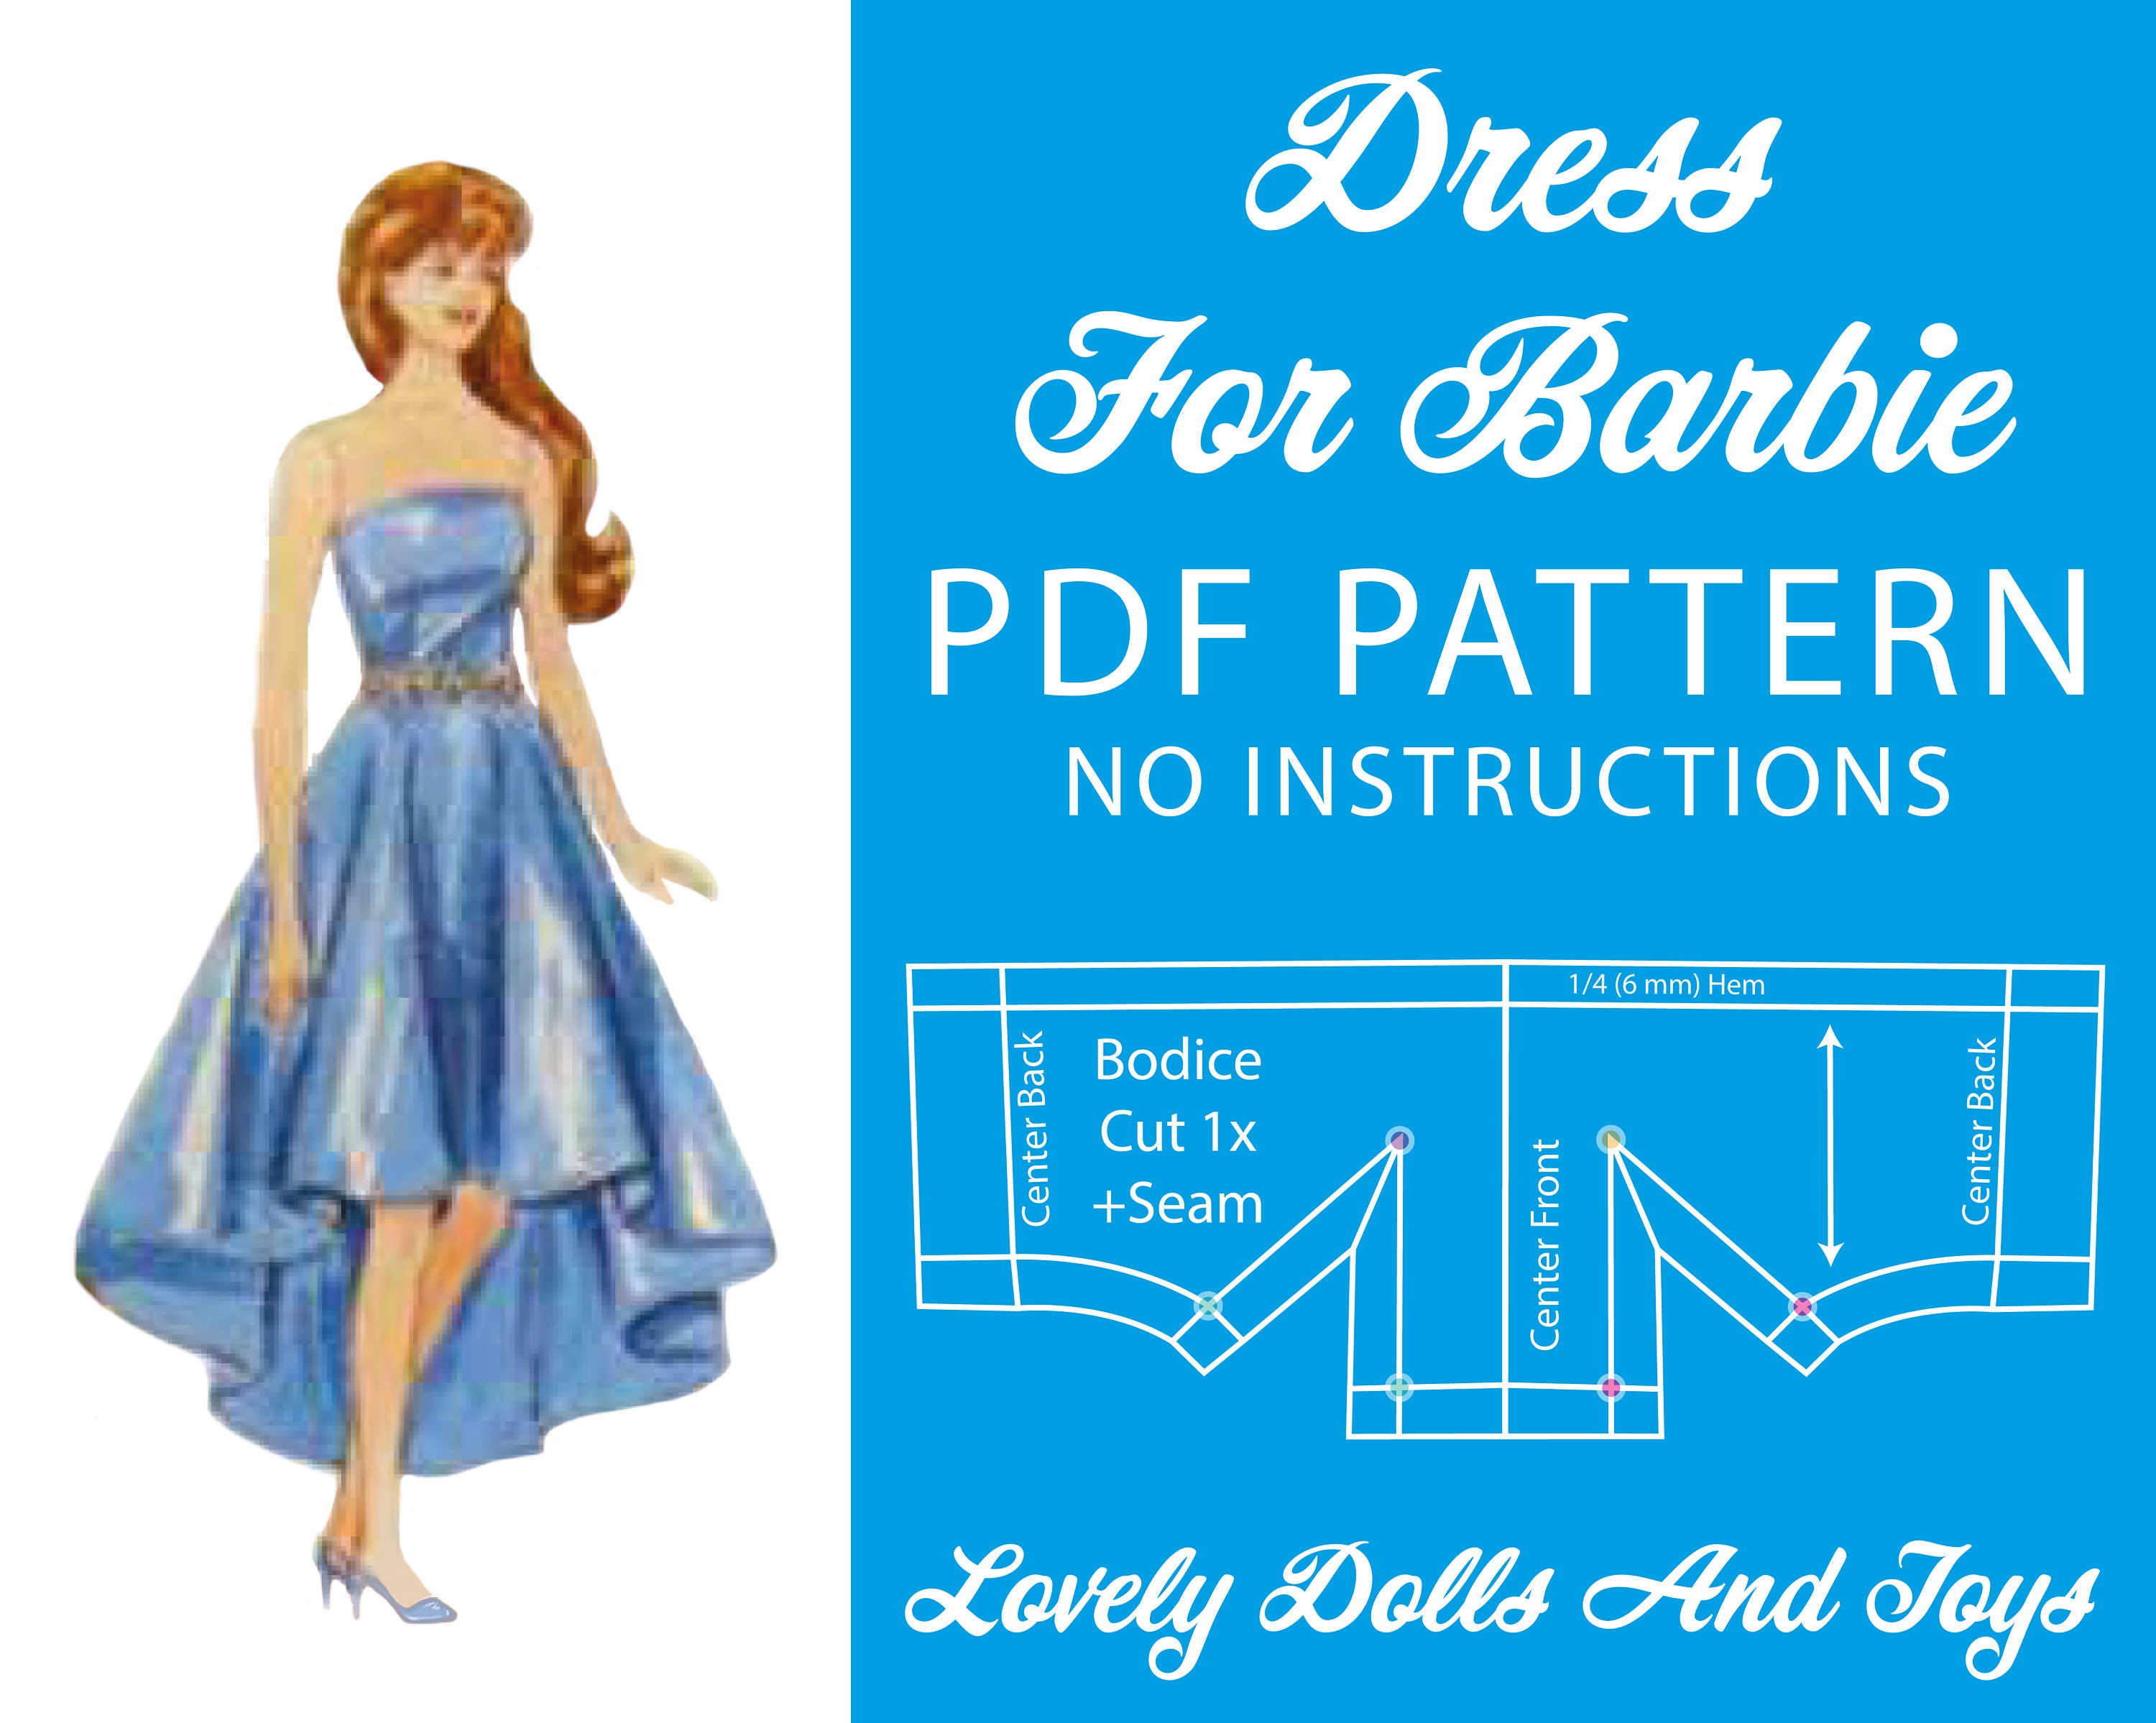 Top 10 Free Dress Patterns We Love! - The Stitch Sisters Sewing Patterns